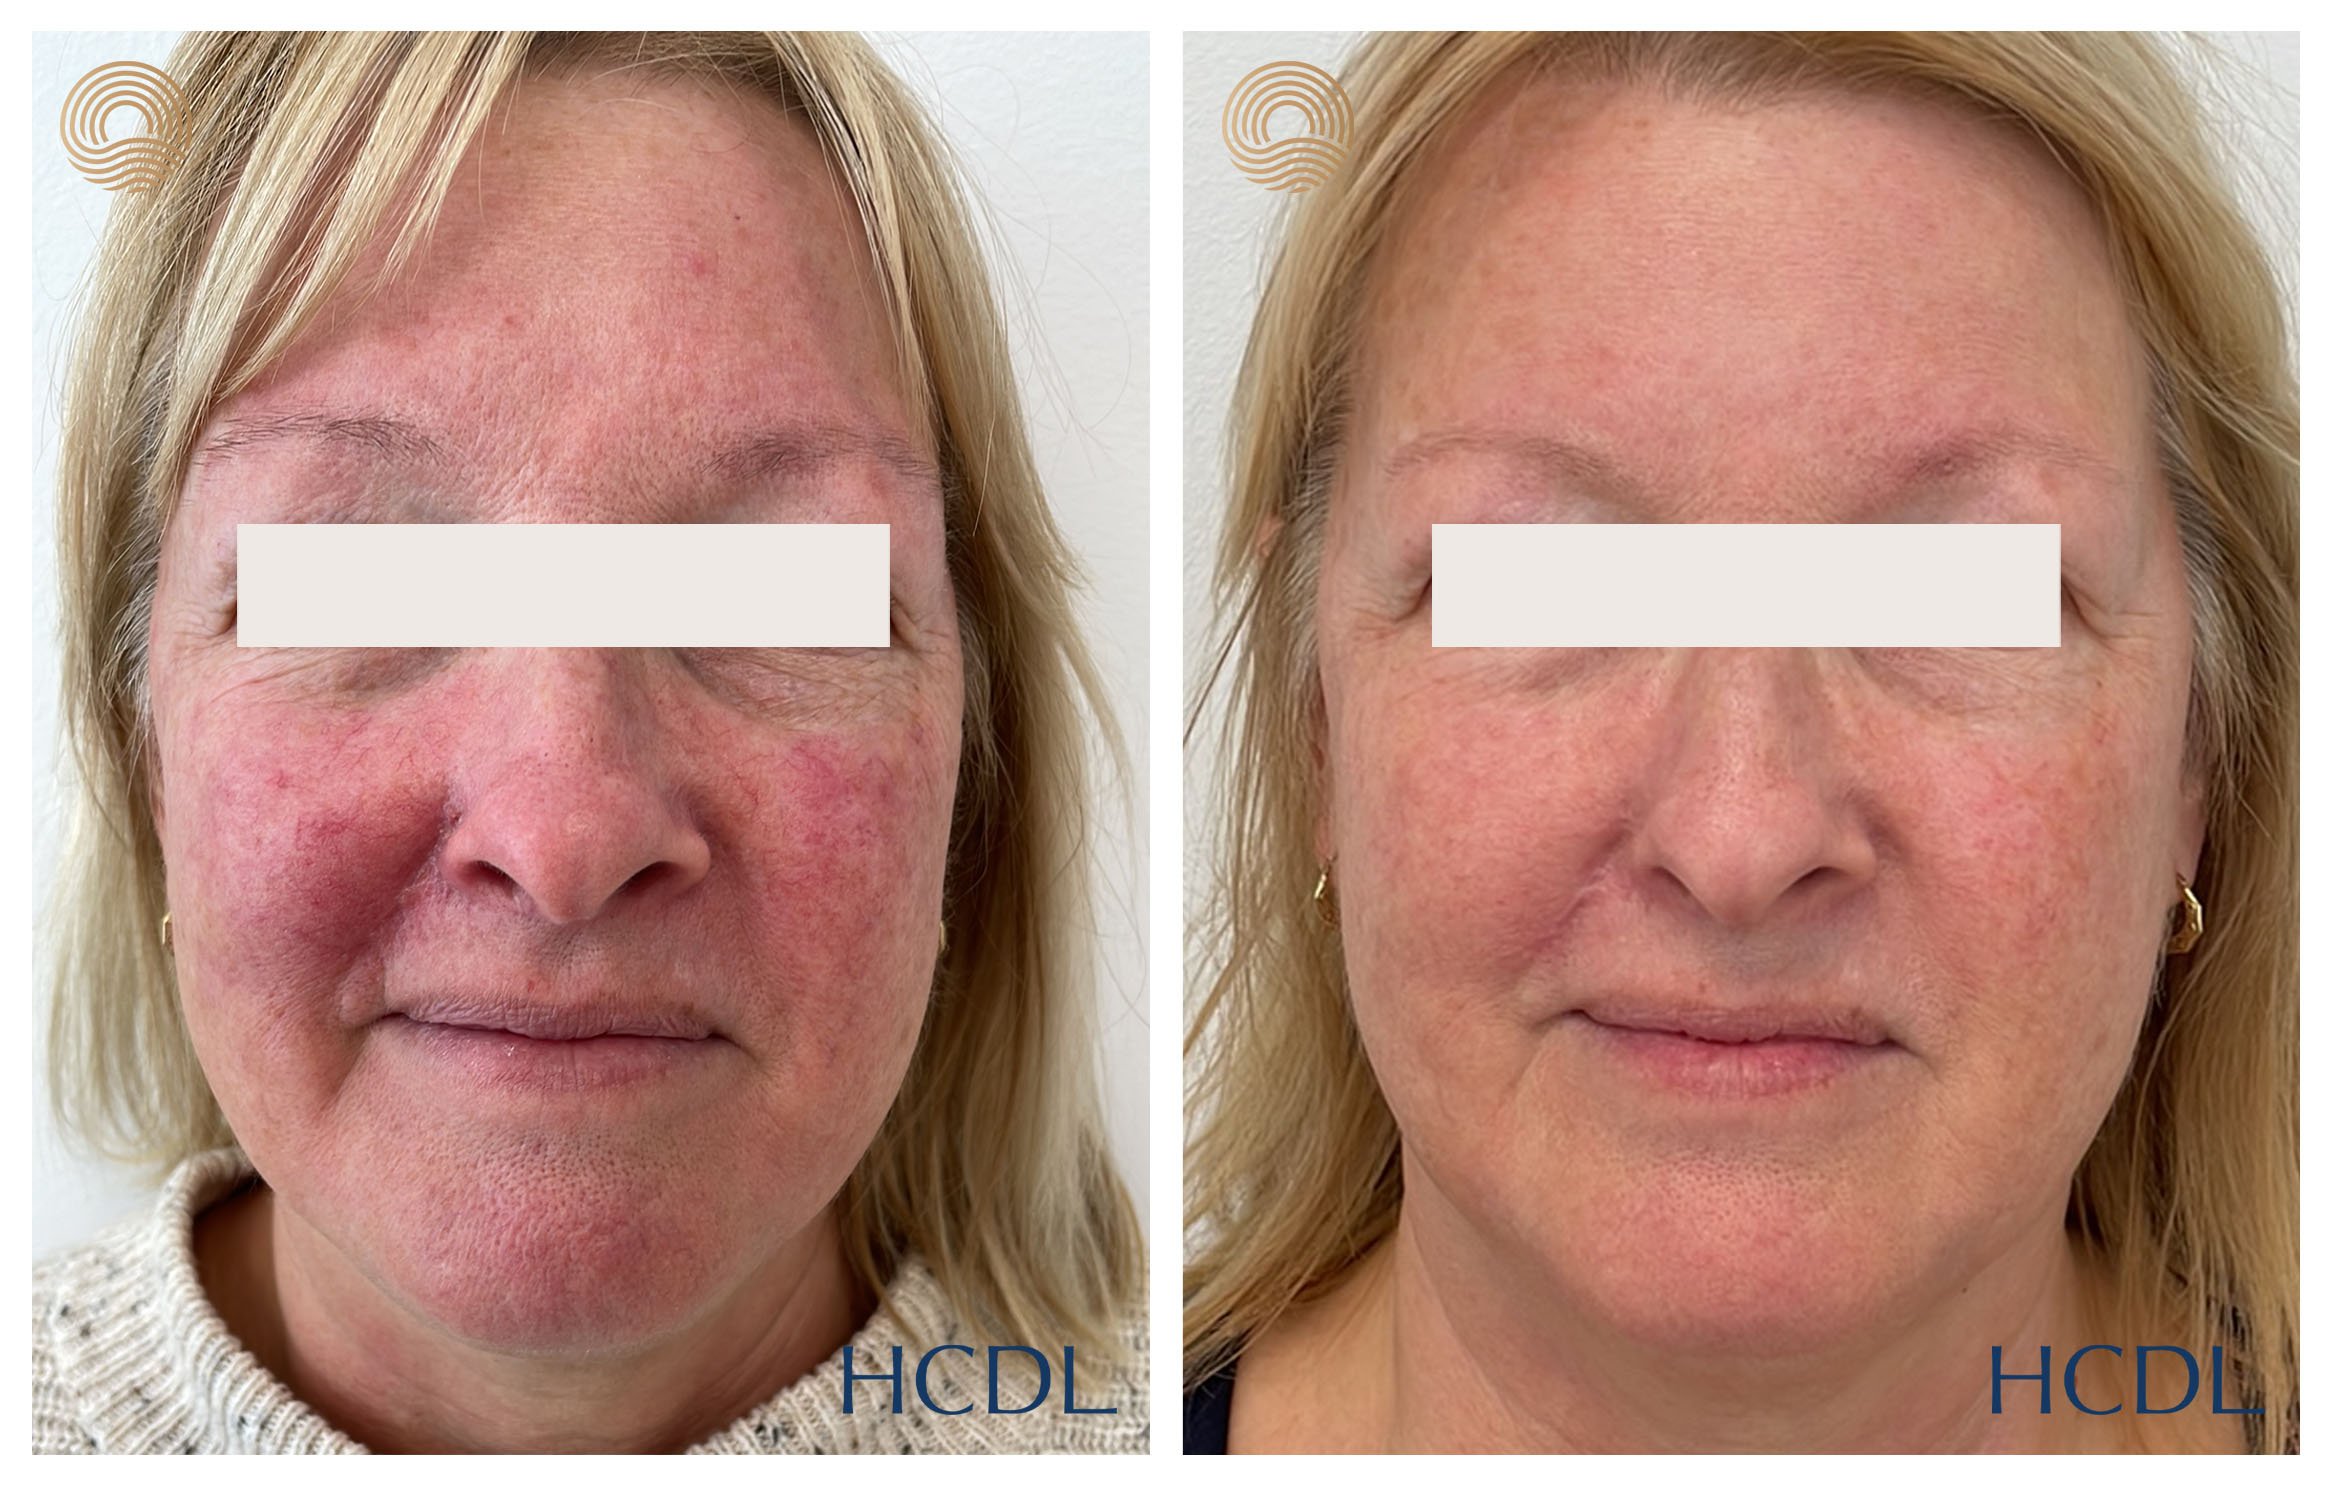 Results after only 1 treatment of vascular laser.